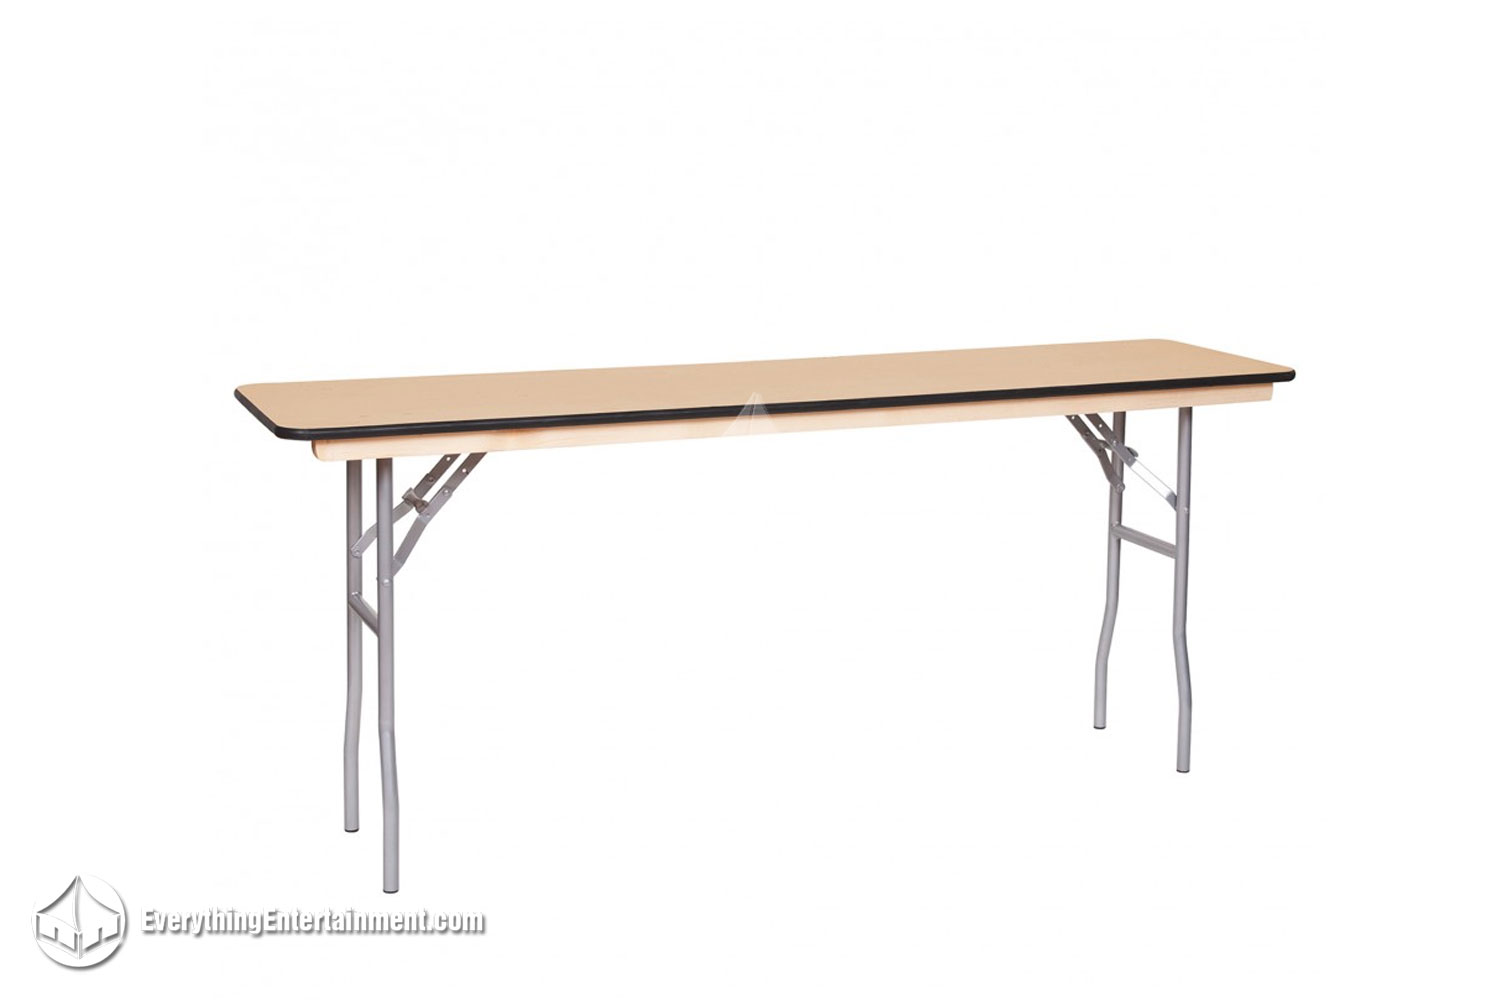 A 6 foot seminar table on white background